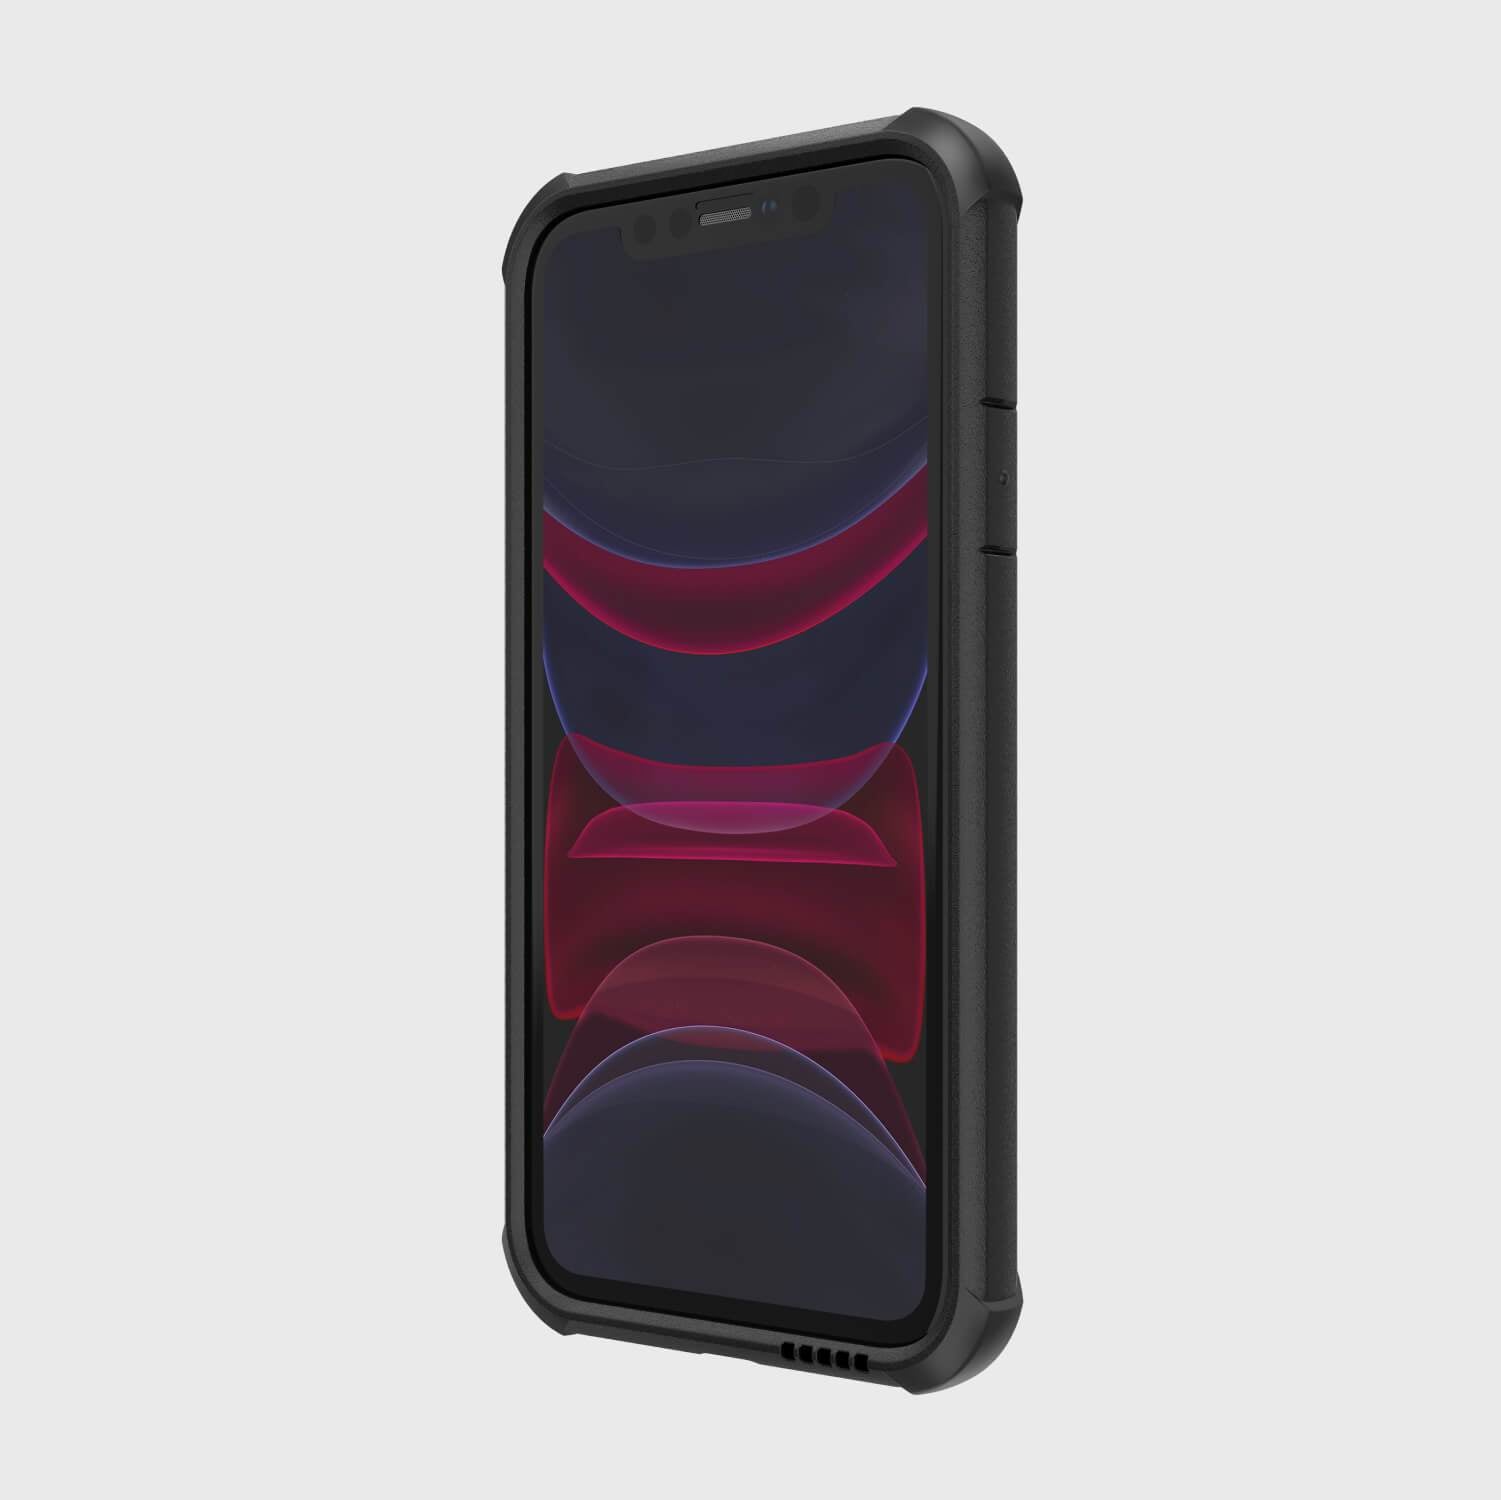 The shock-absorbing iPhone 11 Pro case - TACTICAL is shown on a white background by Raptic.